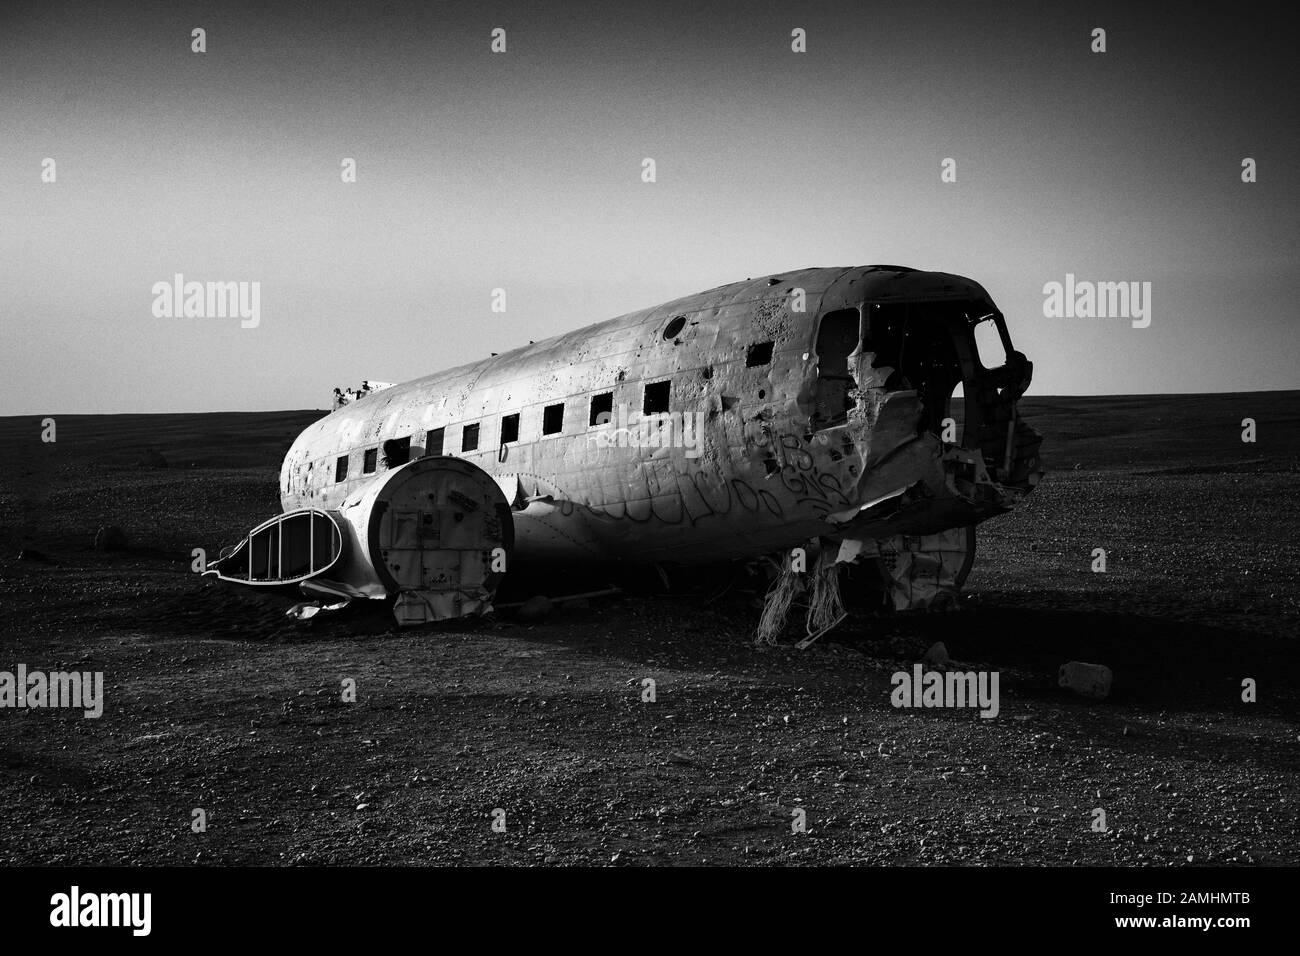 US Navy crashed DC3 in Sólheimasandur, near Hofn in Iceland. The plane crashed in 1973 with 7 crew on board, who were uninjured. Stock Photo